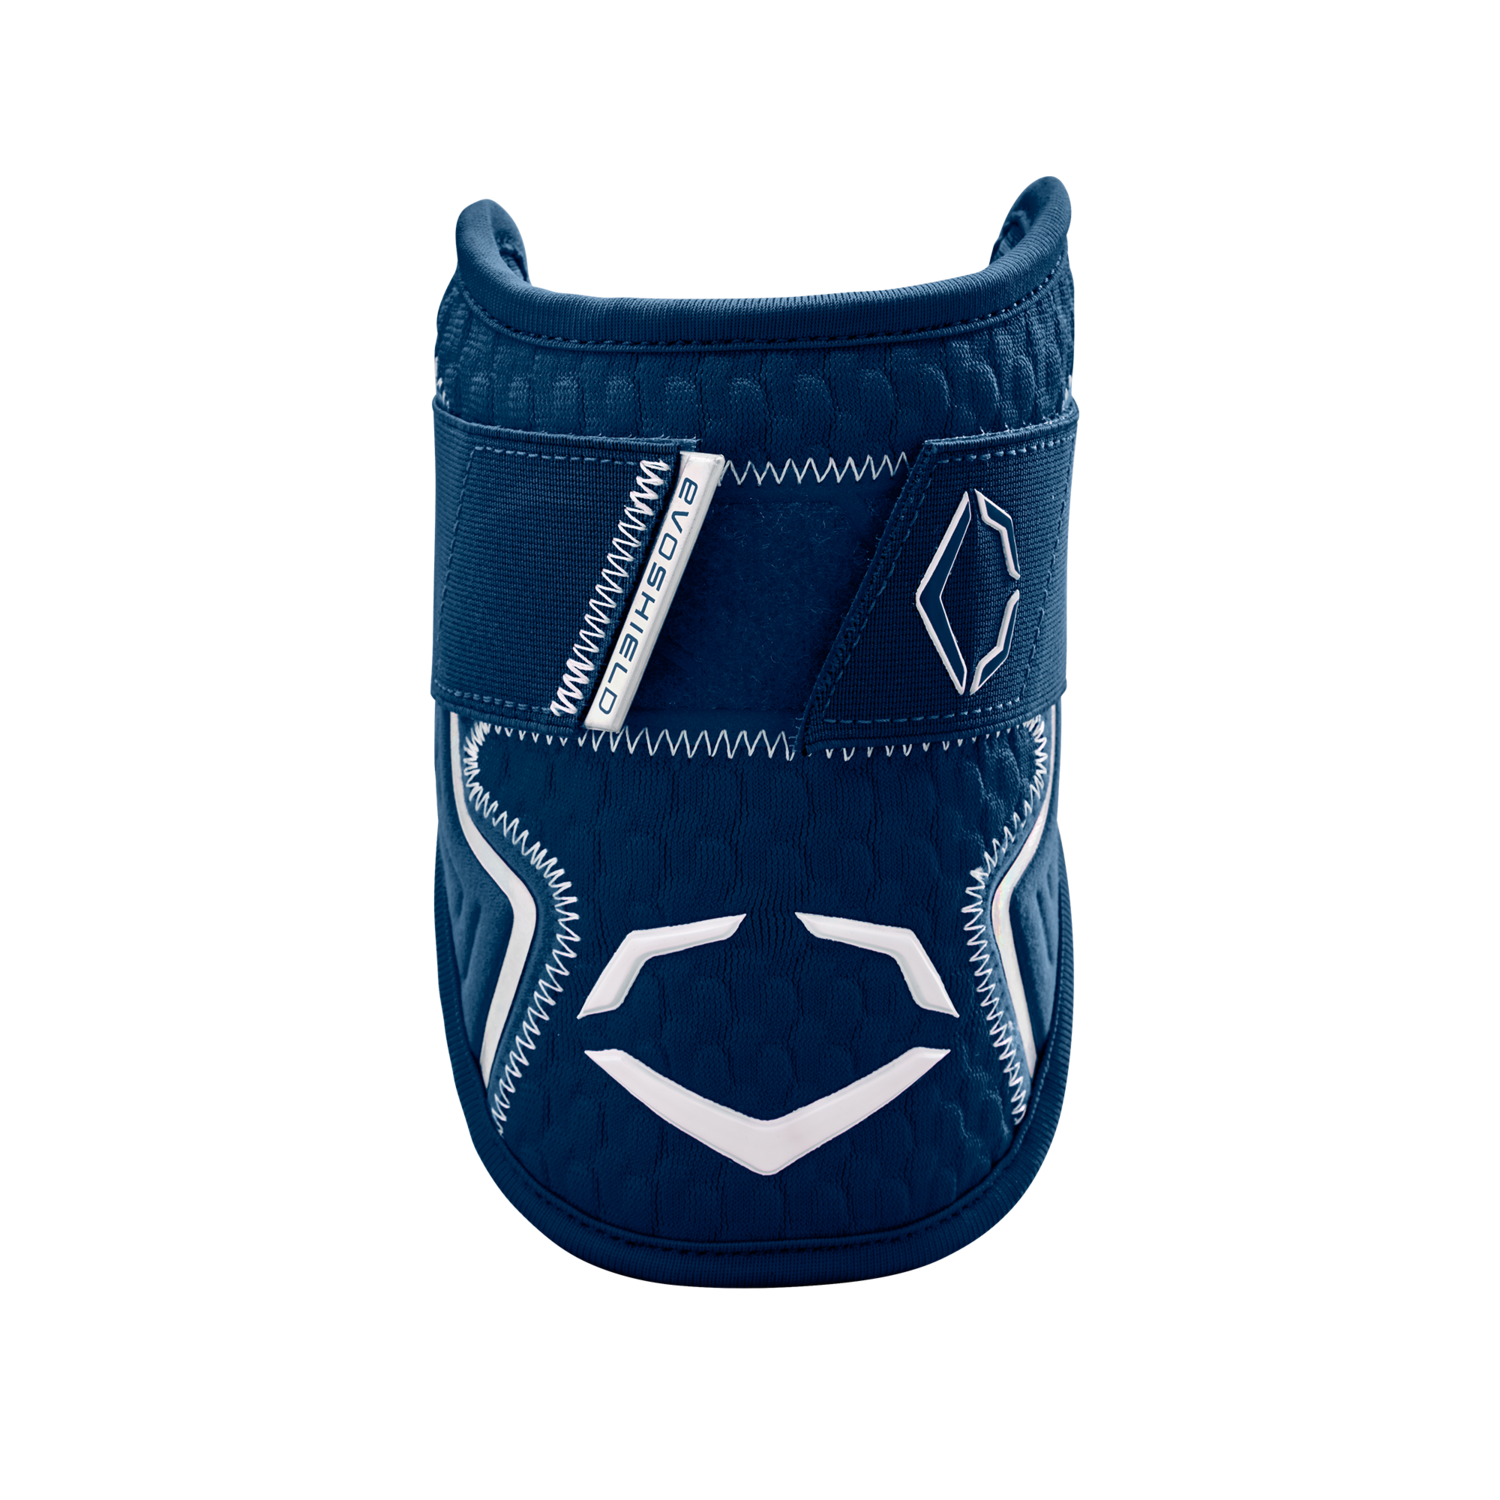 EvoShield Lacrosse Arm Guards: Formed for Fast